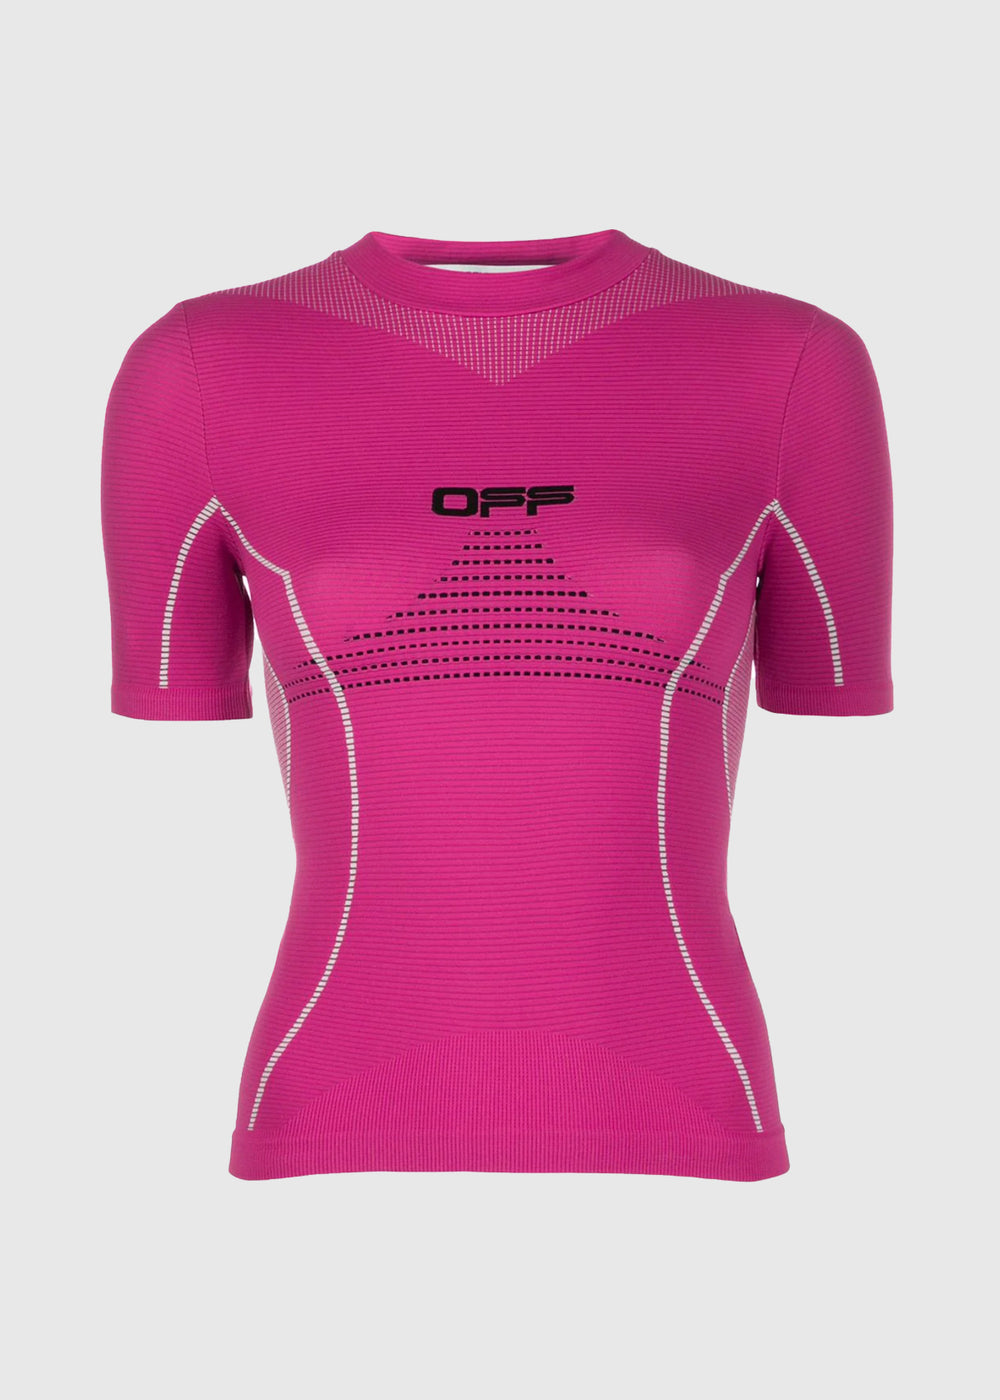 OFF-WHITE: ACTIVE SS TOP [PINK 